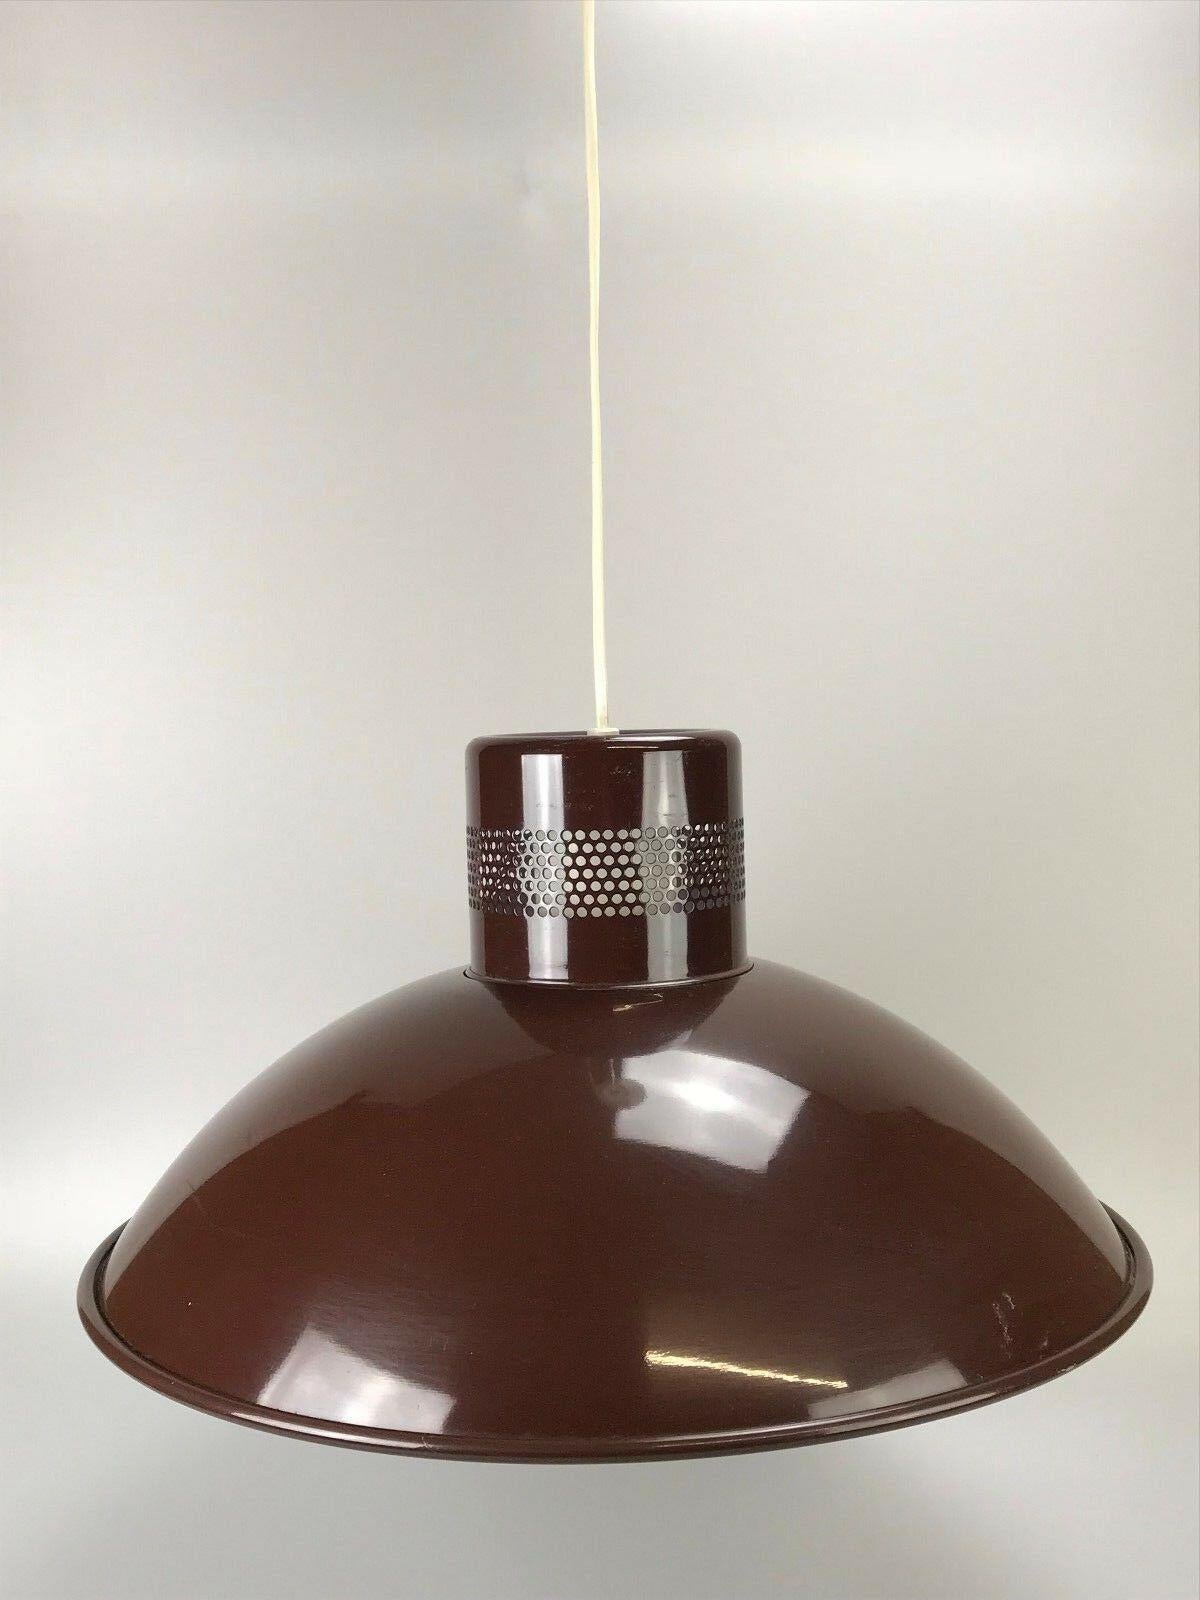 70s Lamp ceiling lamp hanging lamp sheet metal space age design brown.

Object: ceiling lamp.

Manufacturer:

Condition: good

Age: around 1960-1970

Dimensions:

Diameter = 44cm
Hanging height = 60cm

Other notes:

The pictures